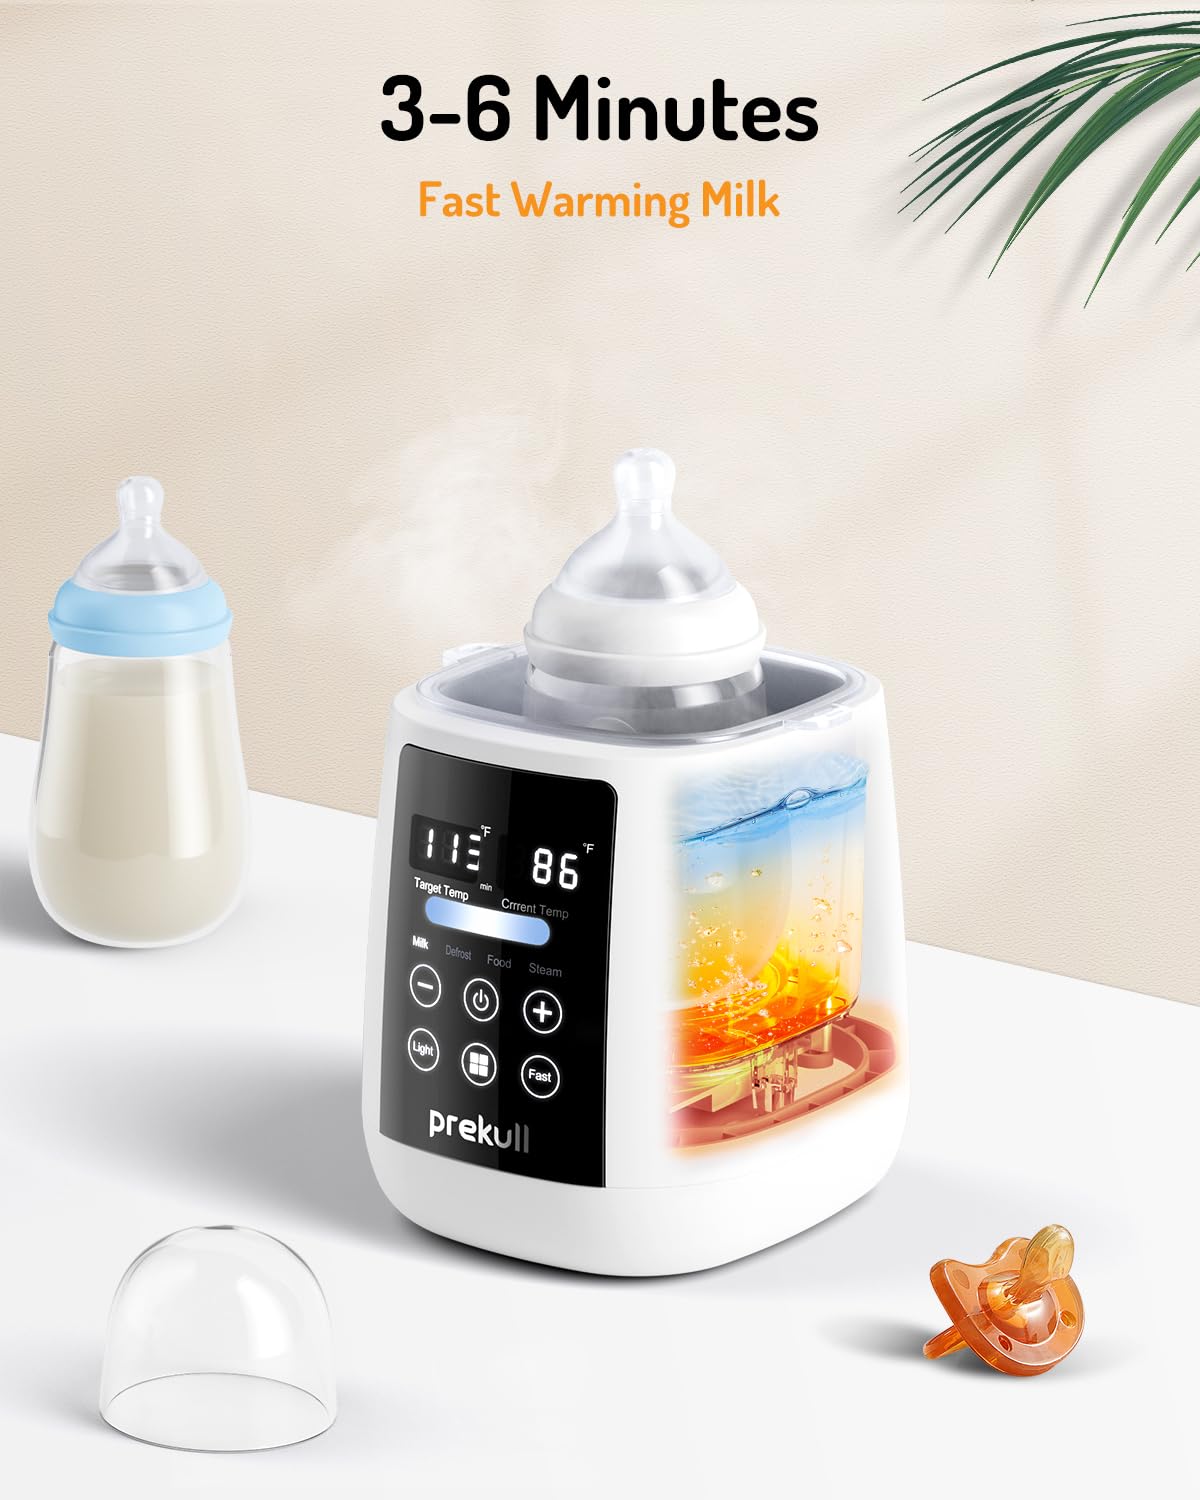 Bottle Warmer, prekull Fast Baby Bottle Warmer for Breastmilk, Formula with Accurate Temp Control, 48H Thermostat Baby Milk Warmer with Thaw, Night Light, Bottle Warmers for All Bottles